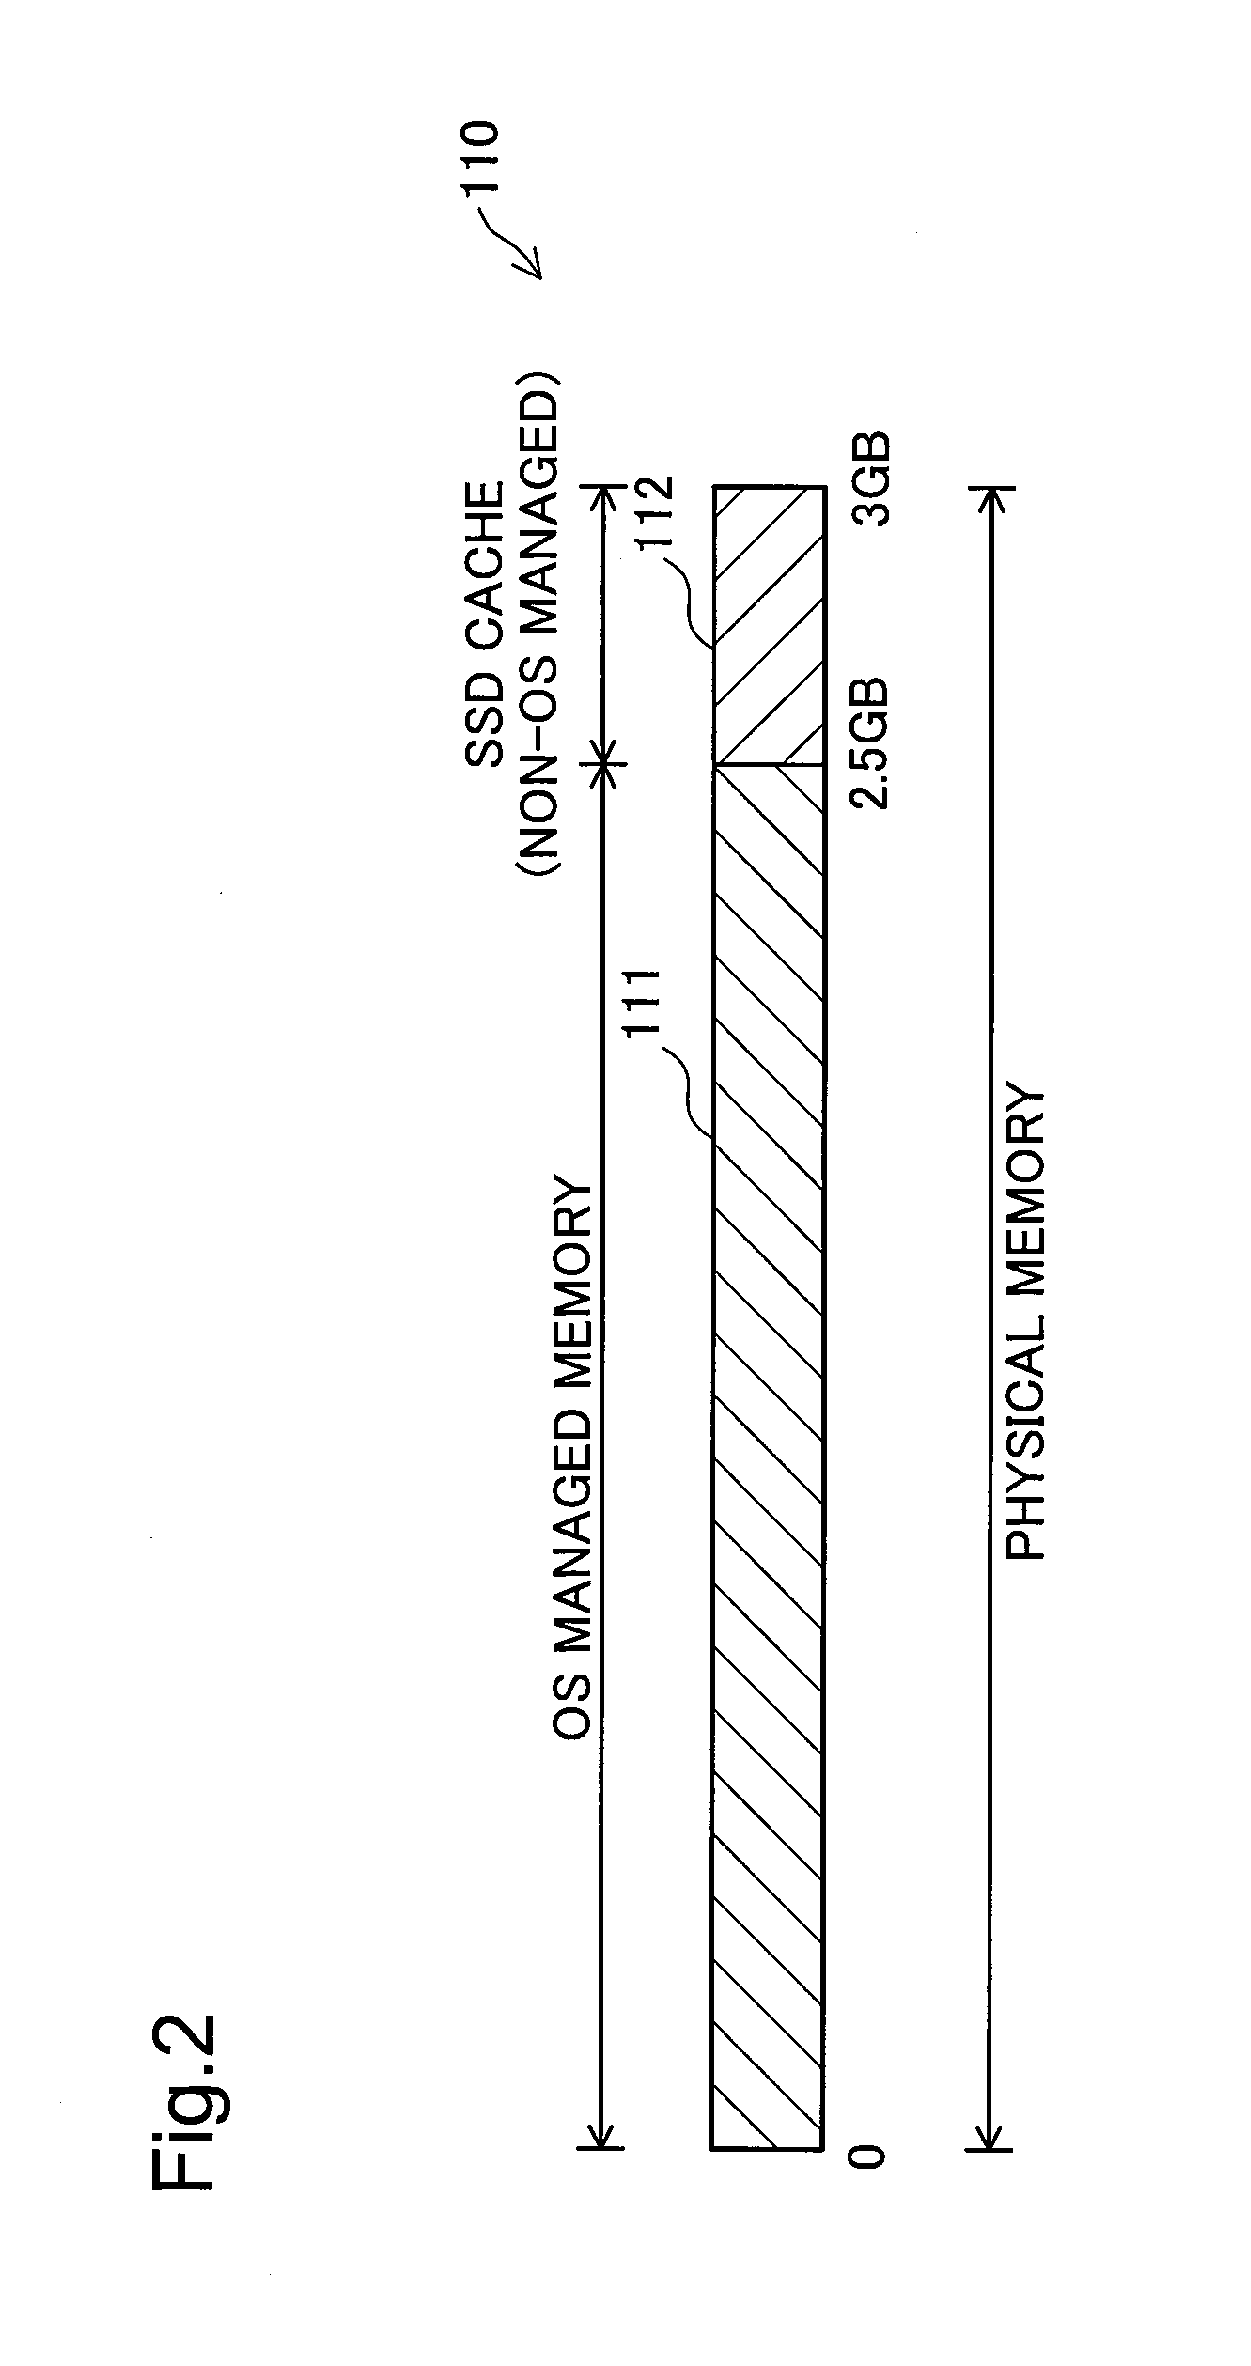 Method to speed up access to an external storage device and an external storage system